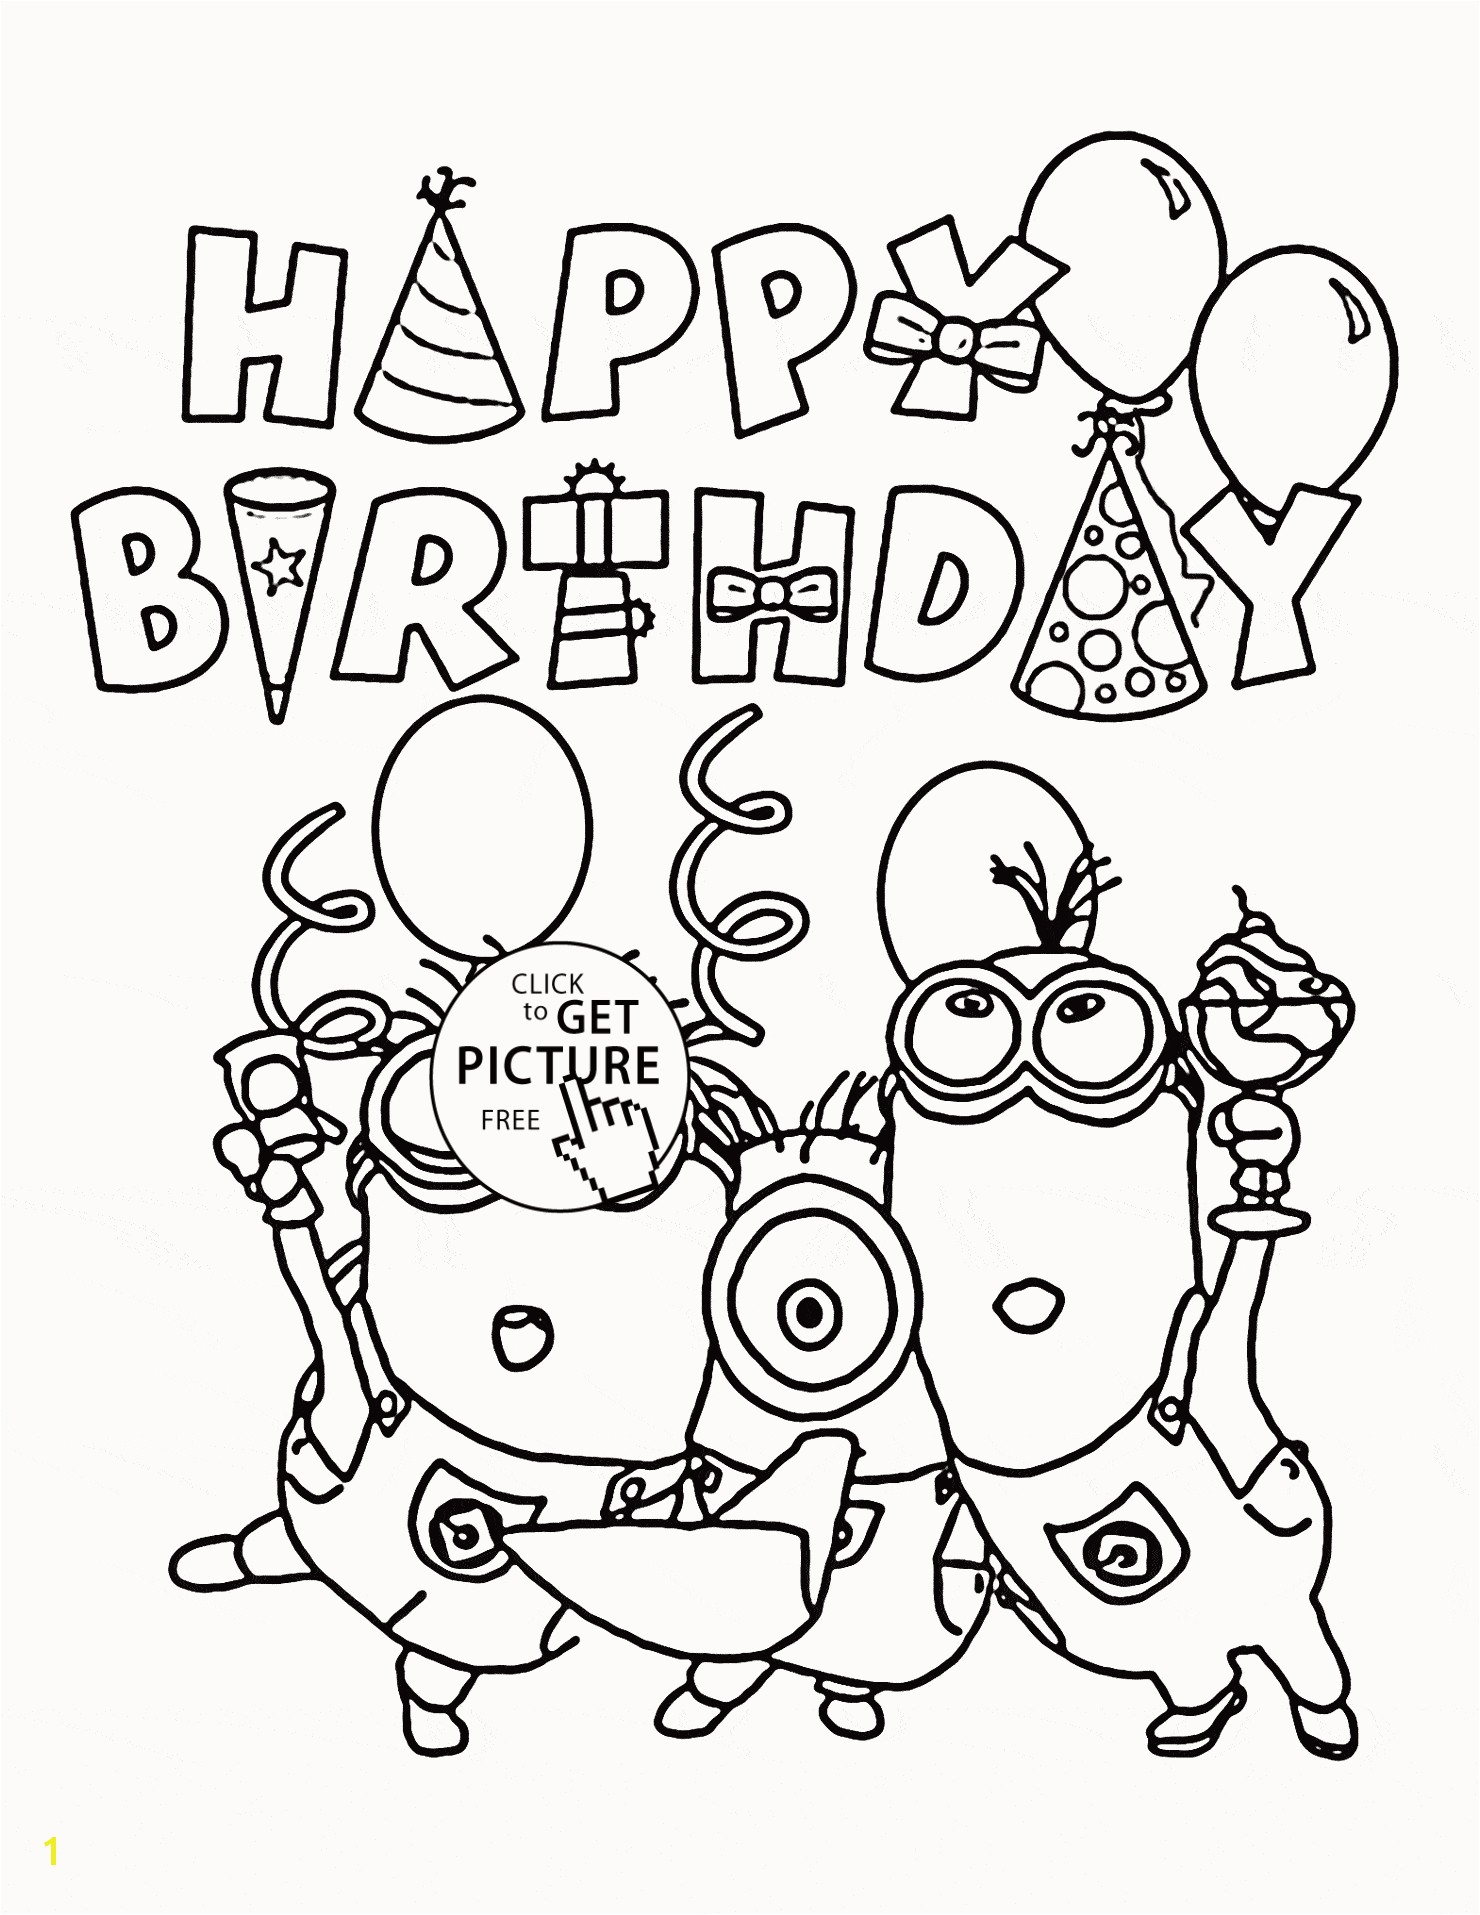 My Little Pony Happy Birthday Coloring Page My Little Pony Birthday Coloring Pages Perfect Happy Birthday